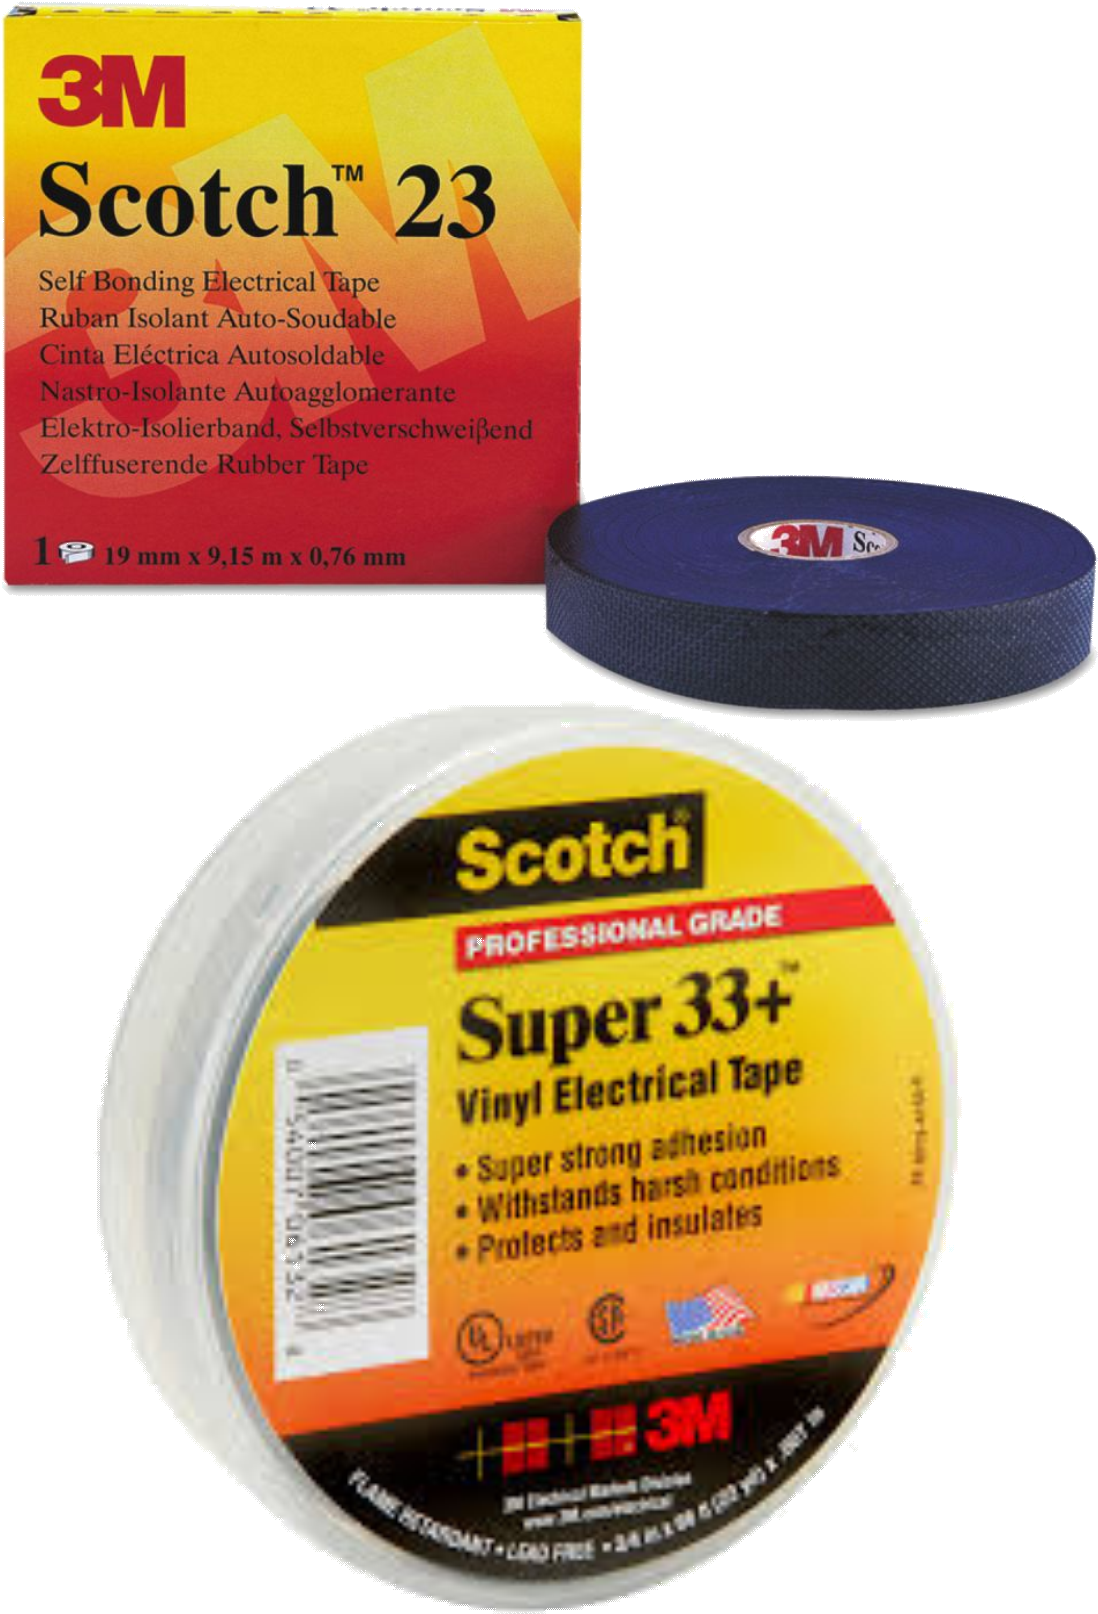 3 M Scotch Electrical Tapes PNG image